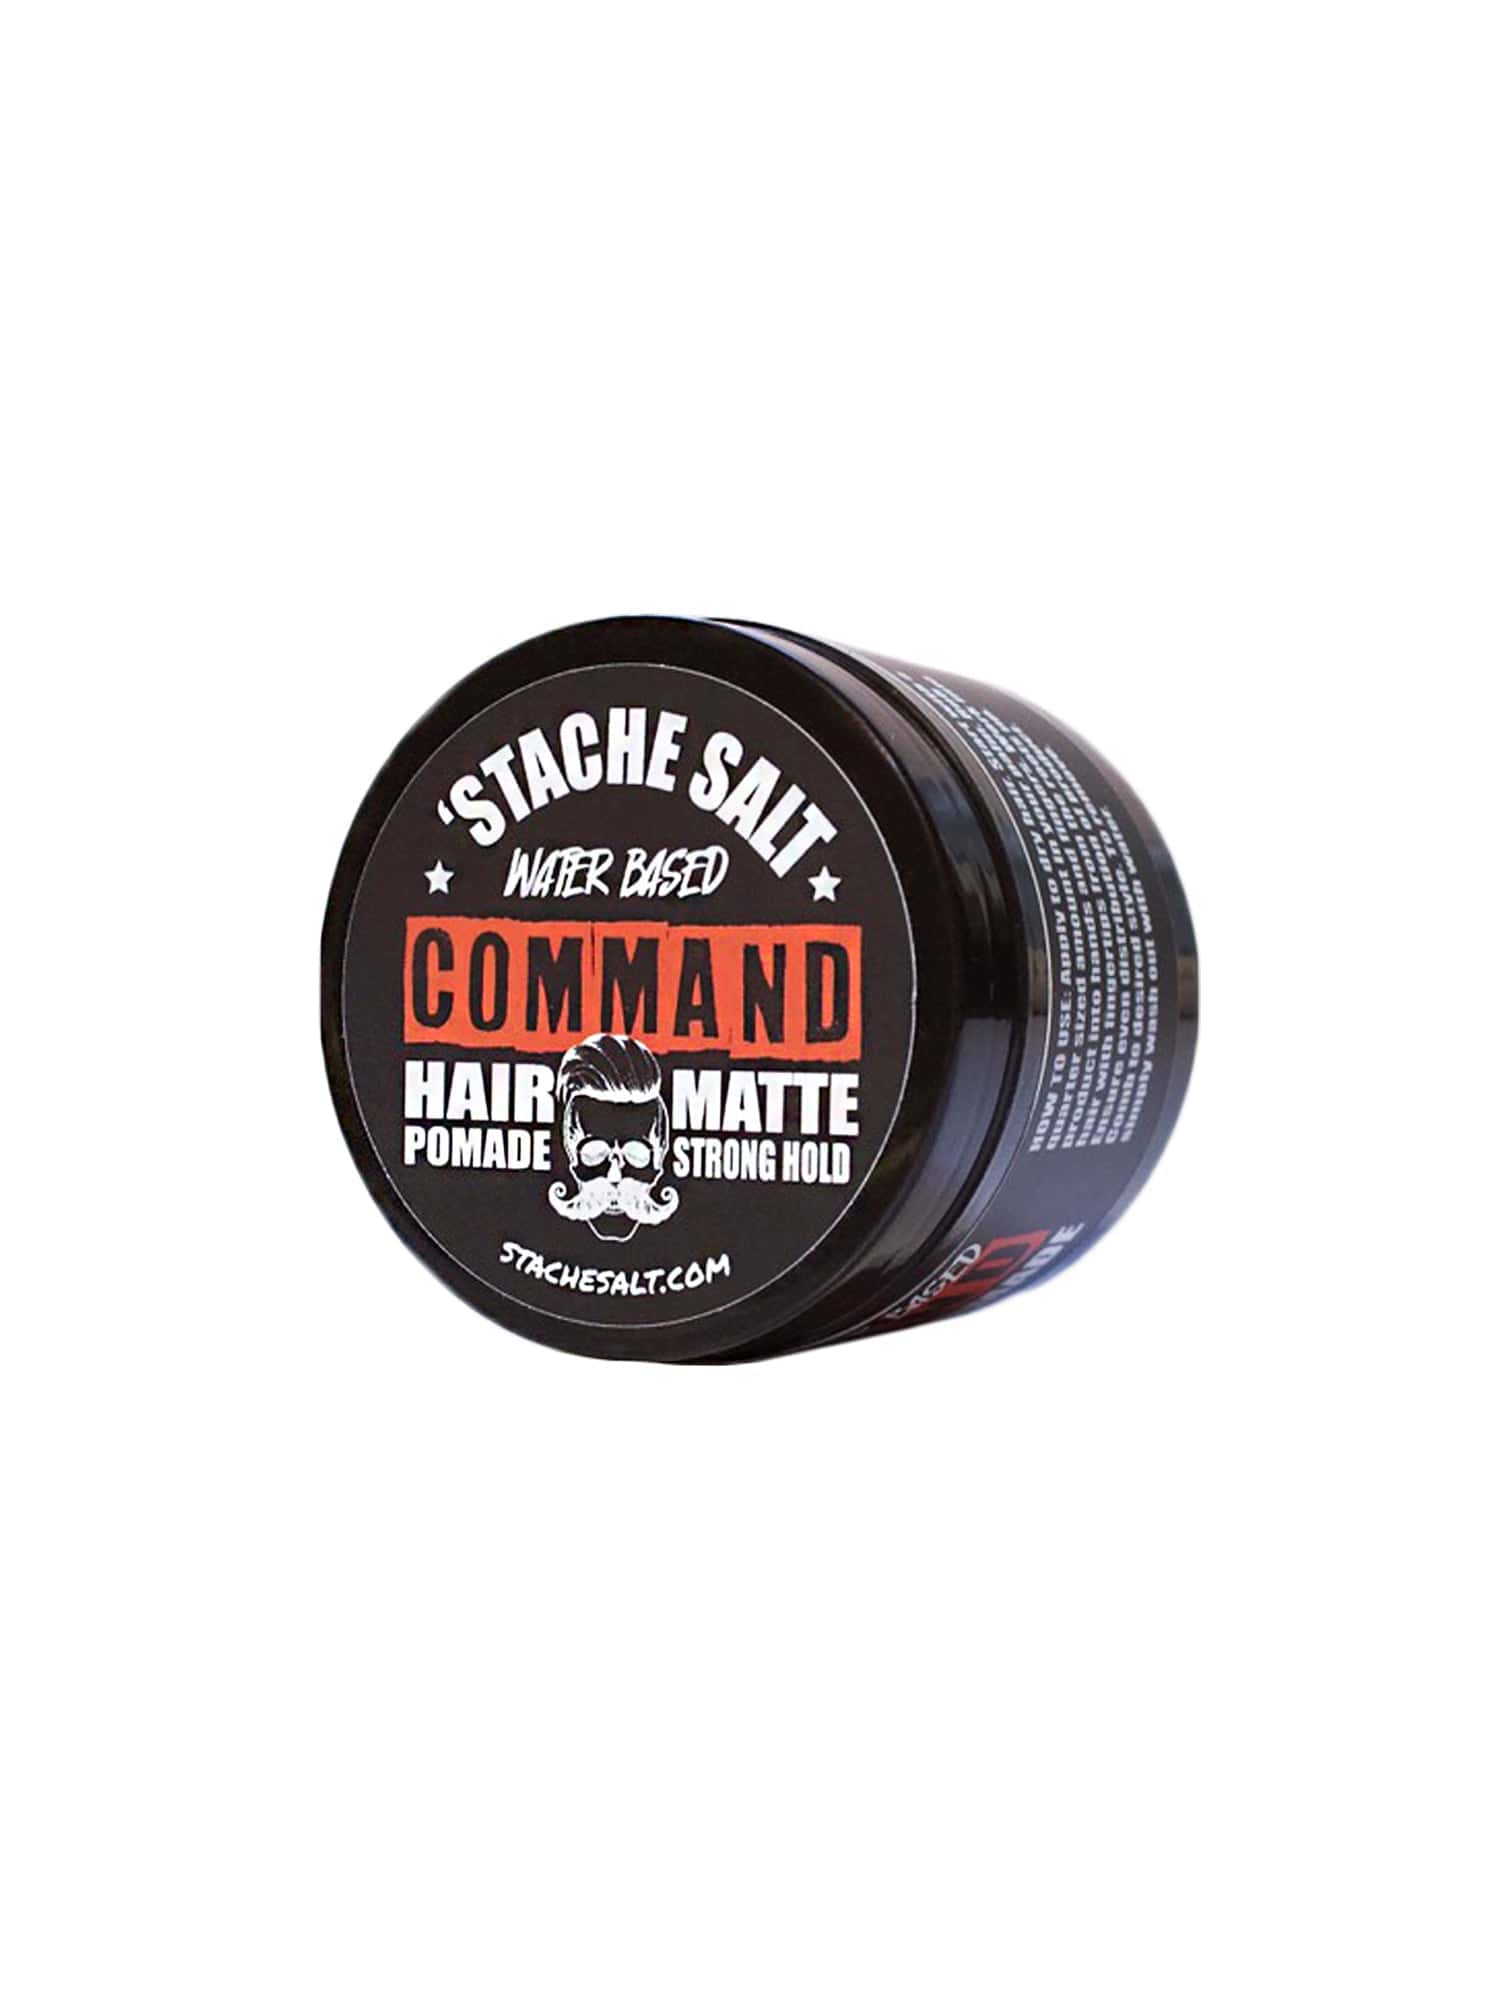 Chief Miller Command Hair Pomade - Water Based Apparel